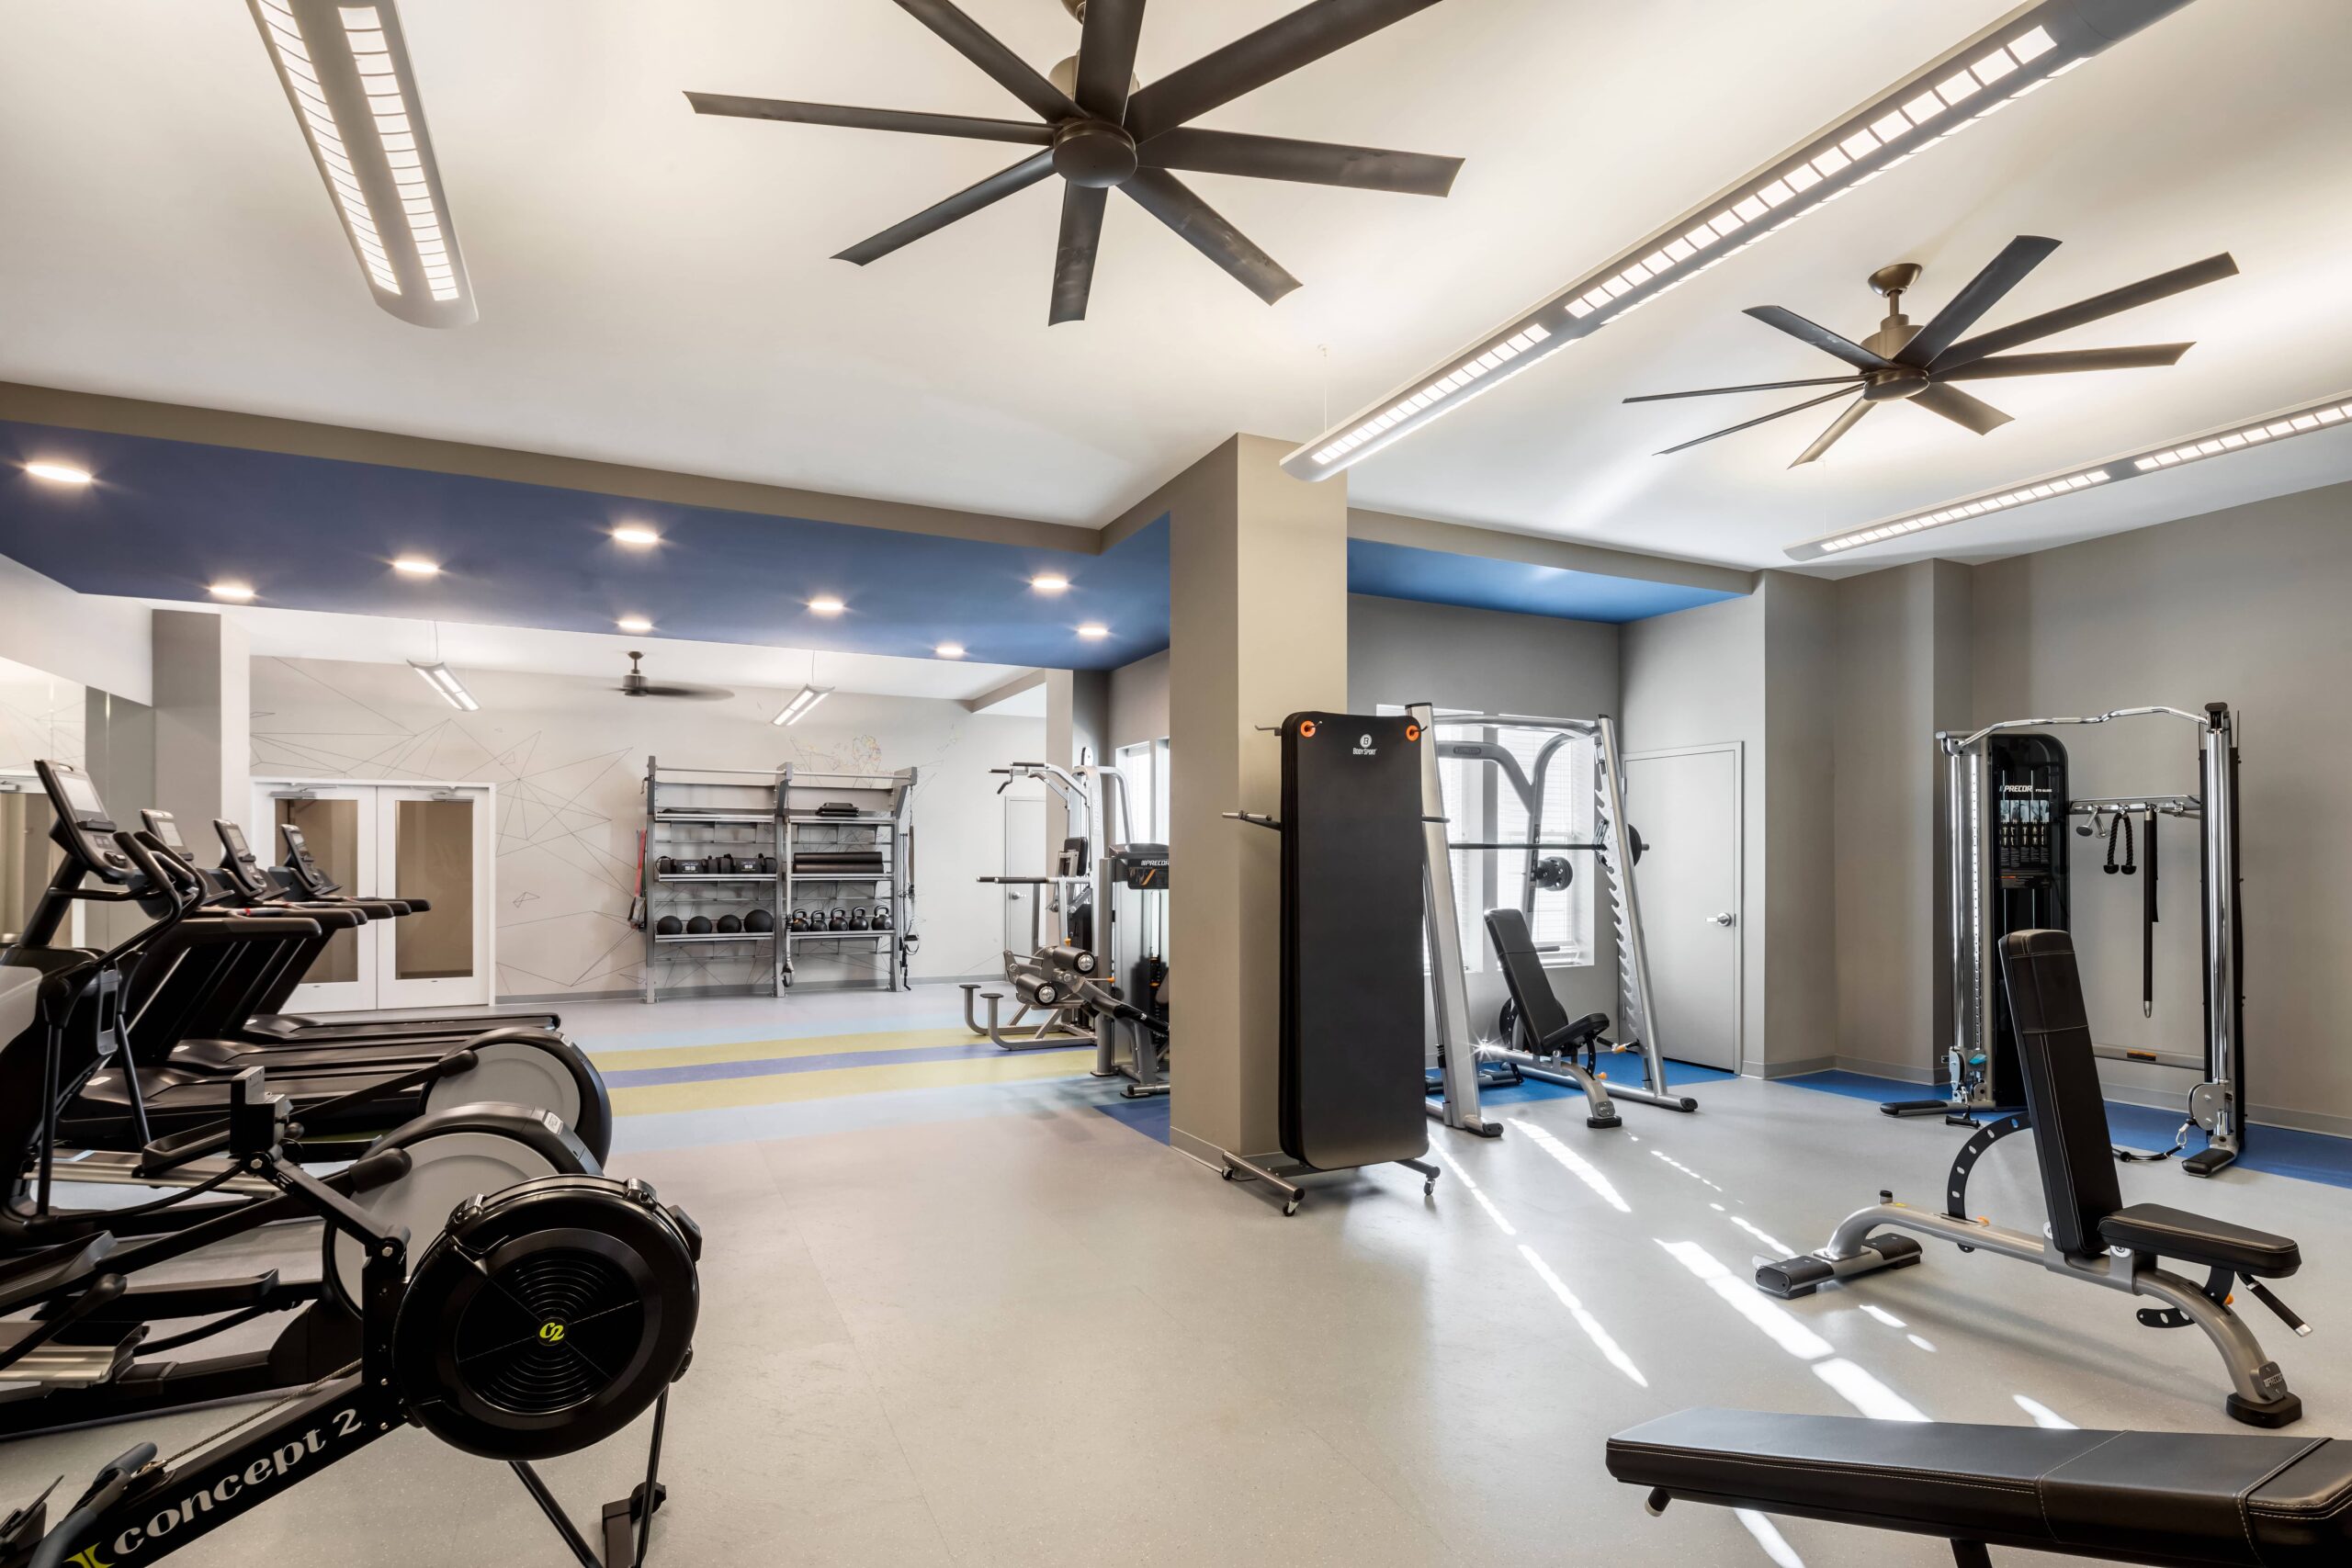 A fully equipped fitness center with weights and multiple machines.